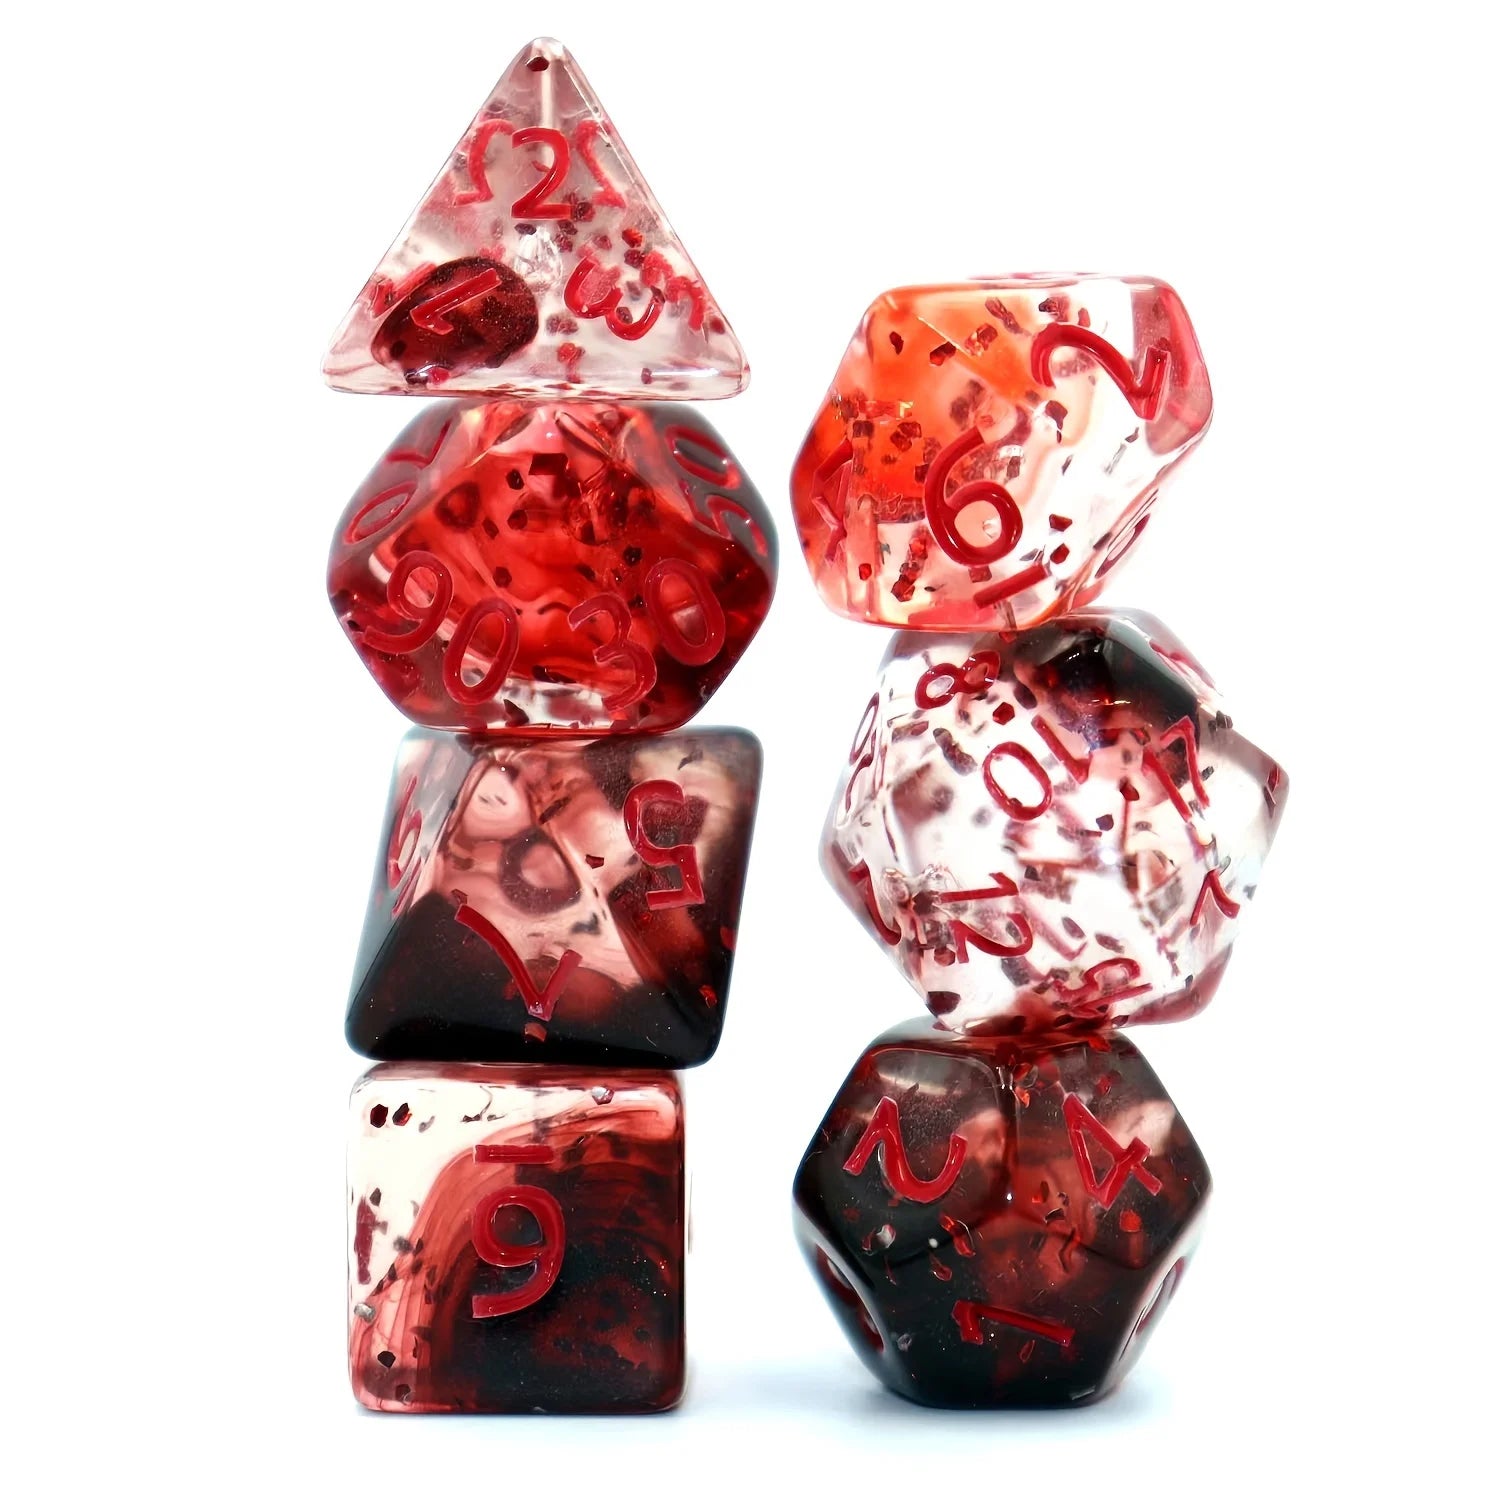 7pcs Set Crystal Style DND Dice Set, Polyhedral Table Game Dice Role-Playing RPG Dice With Box